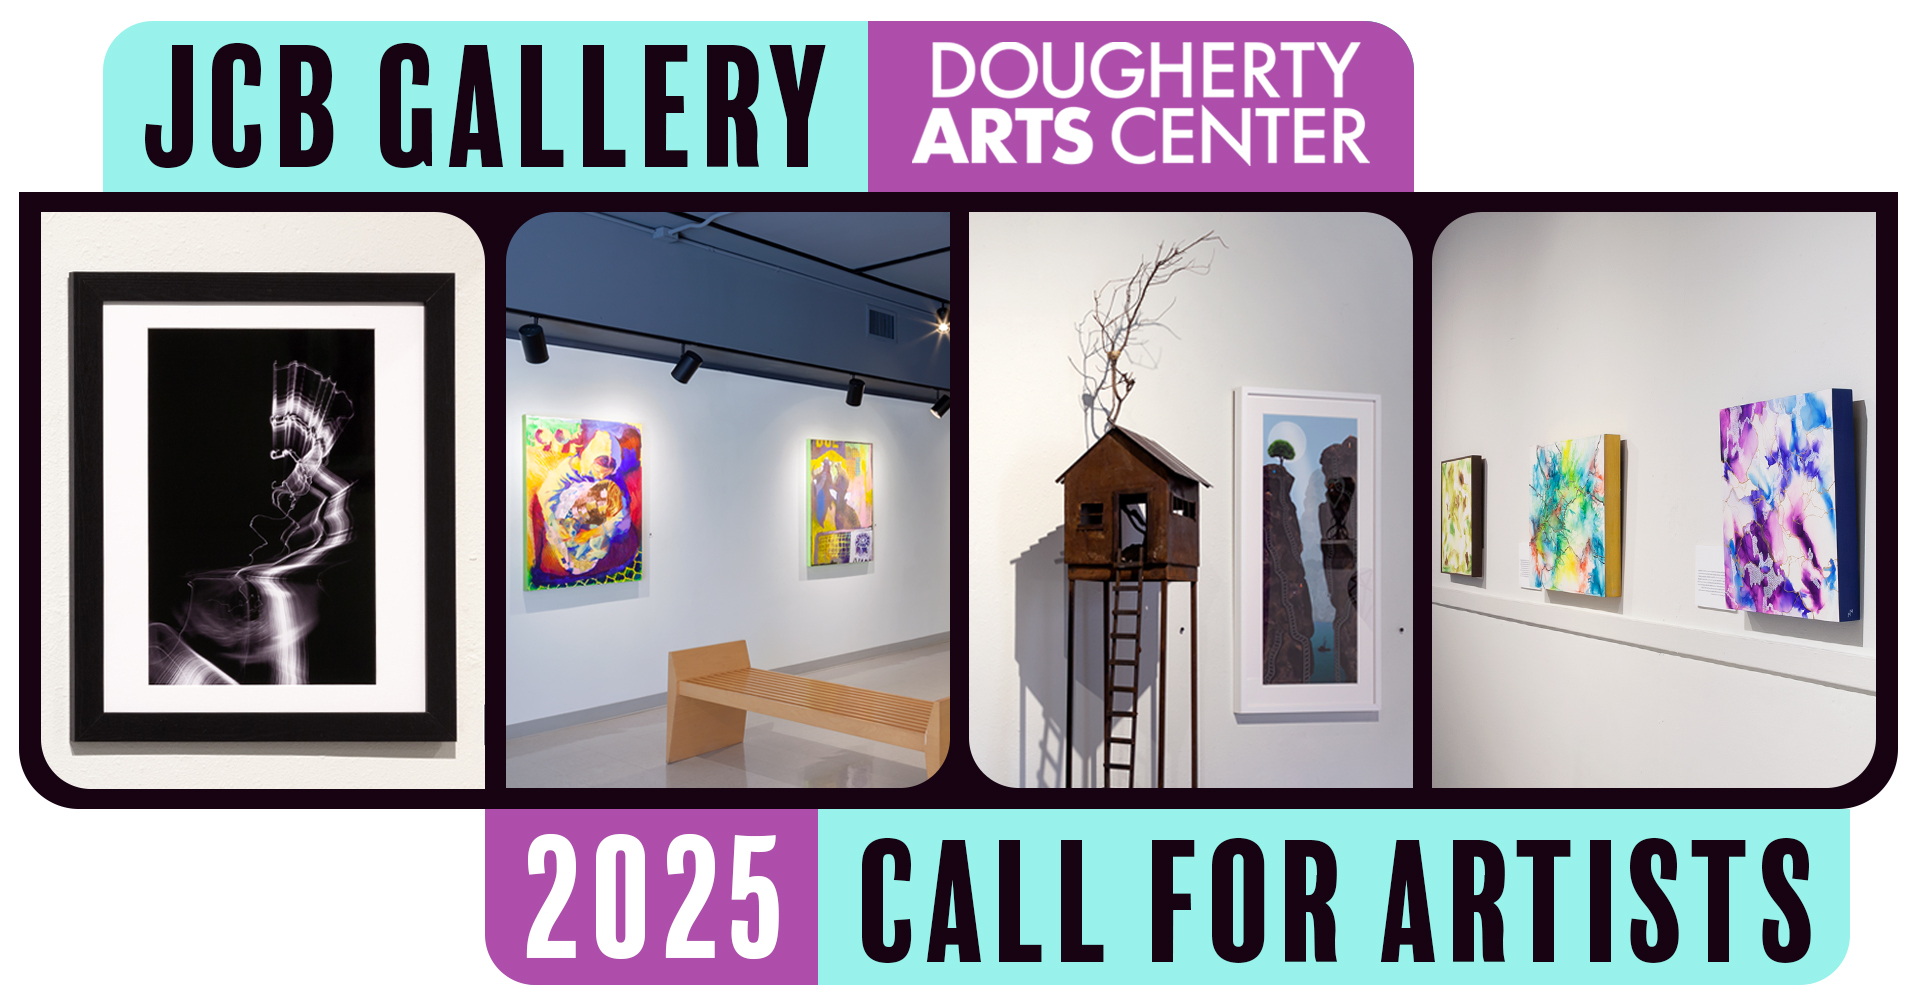 The Julia C. Butridge (JCB) Gallery at the Dougherty Arts Center has extended the deadline to submit Exhibit Proposals for the 2025 Gallery Season.